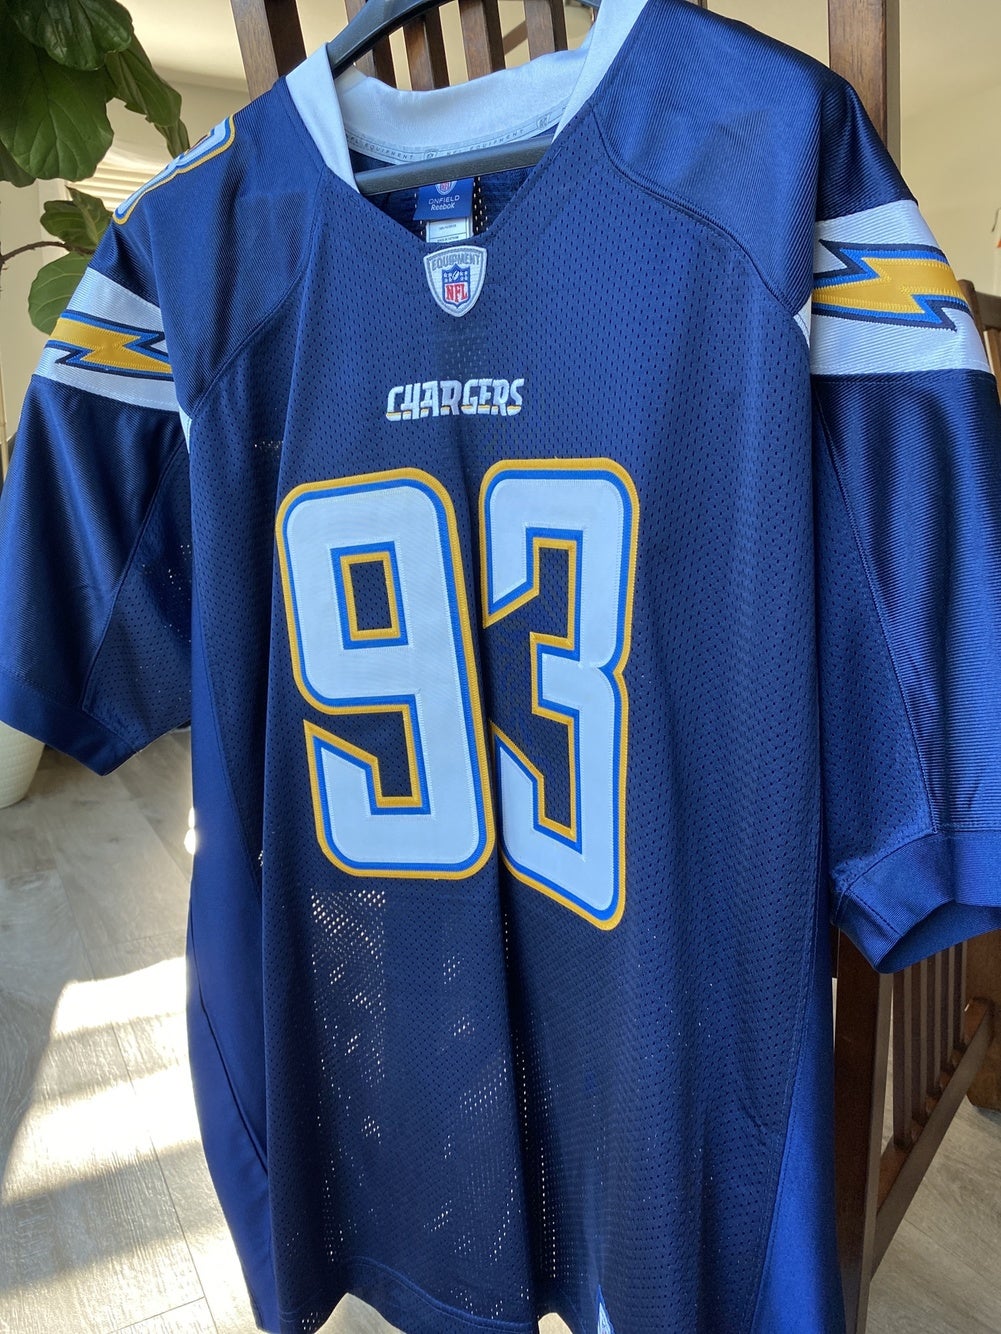 Luis Castillo #93 Signed Chargers Jersey - Reebok Onfield Size XL